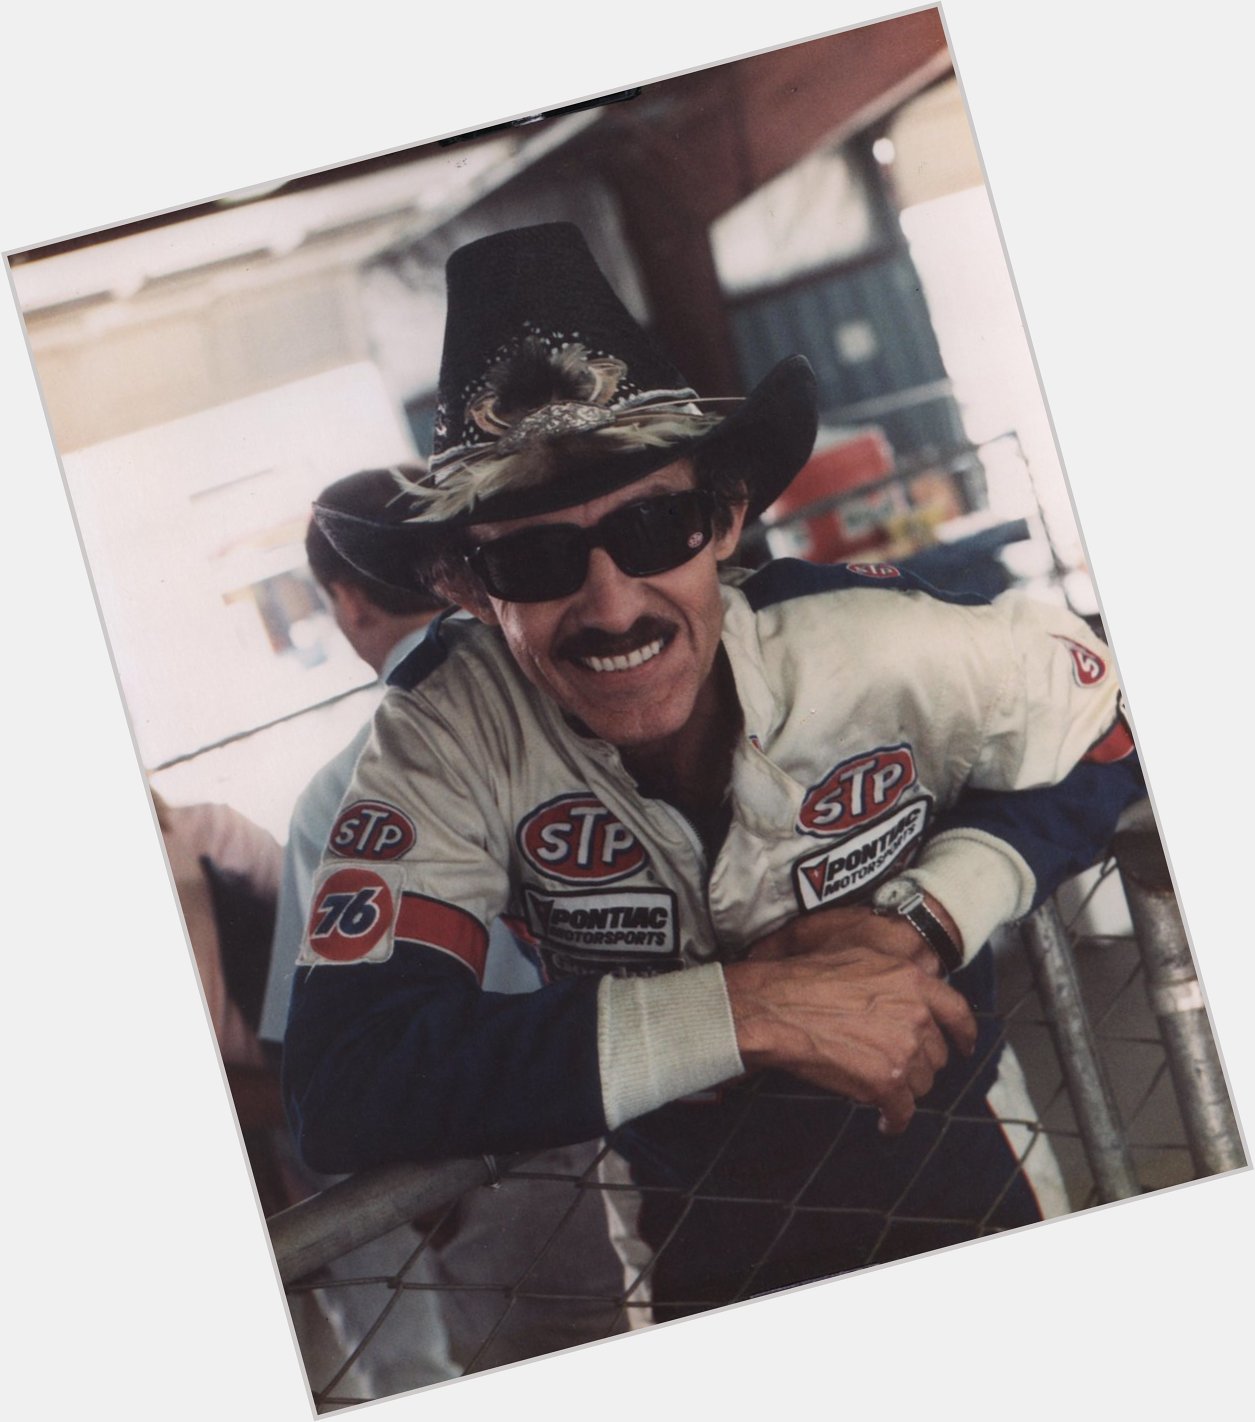 Happy Birthday to Richard Petty, being honored Aug. 6 with the 2015 Cameron Argetsinger Award. 